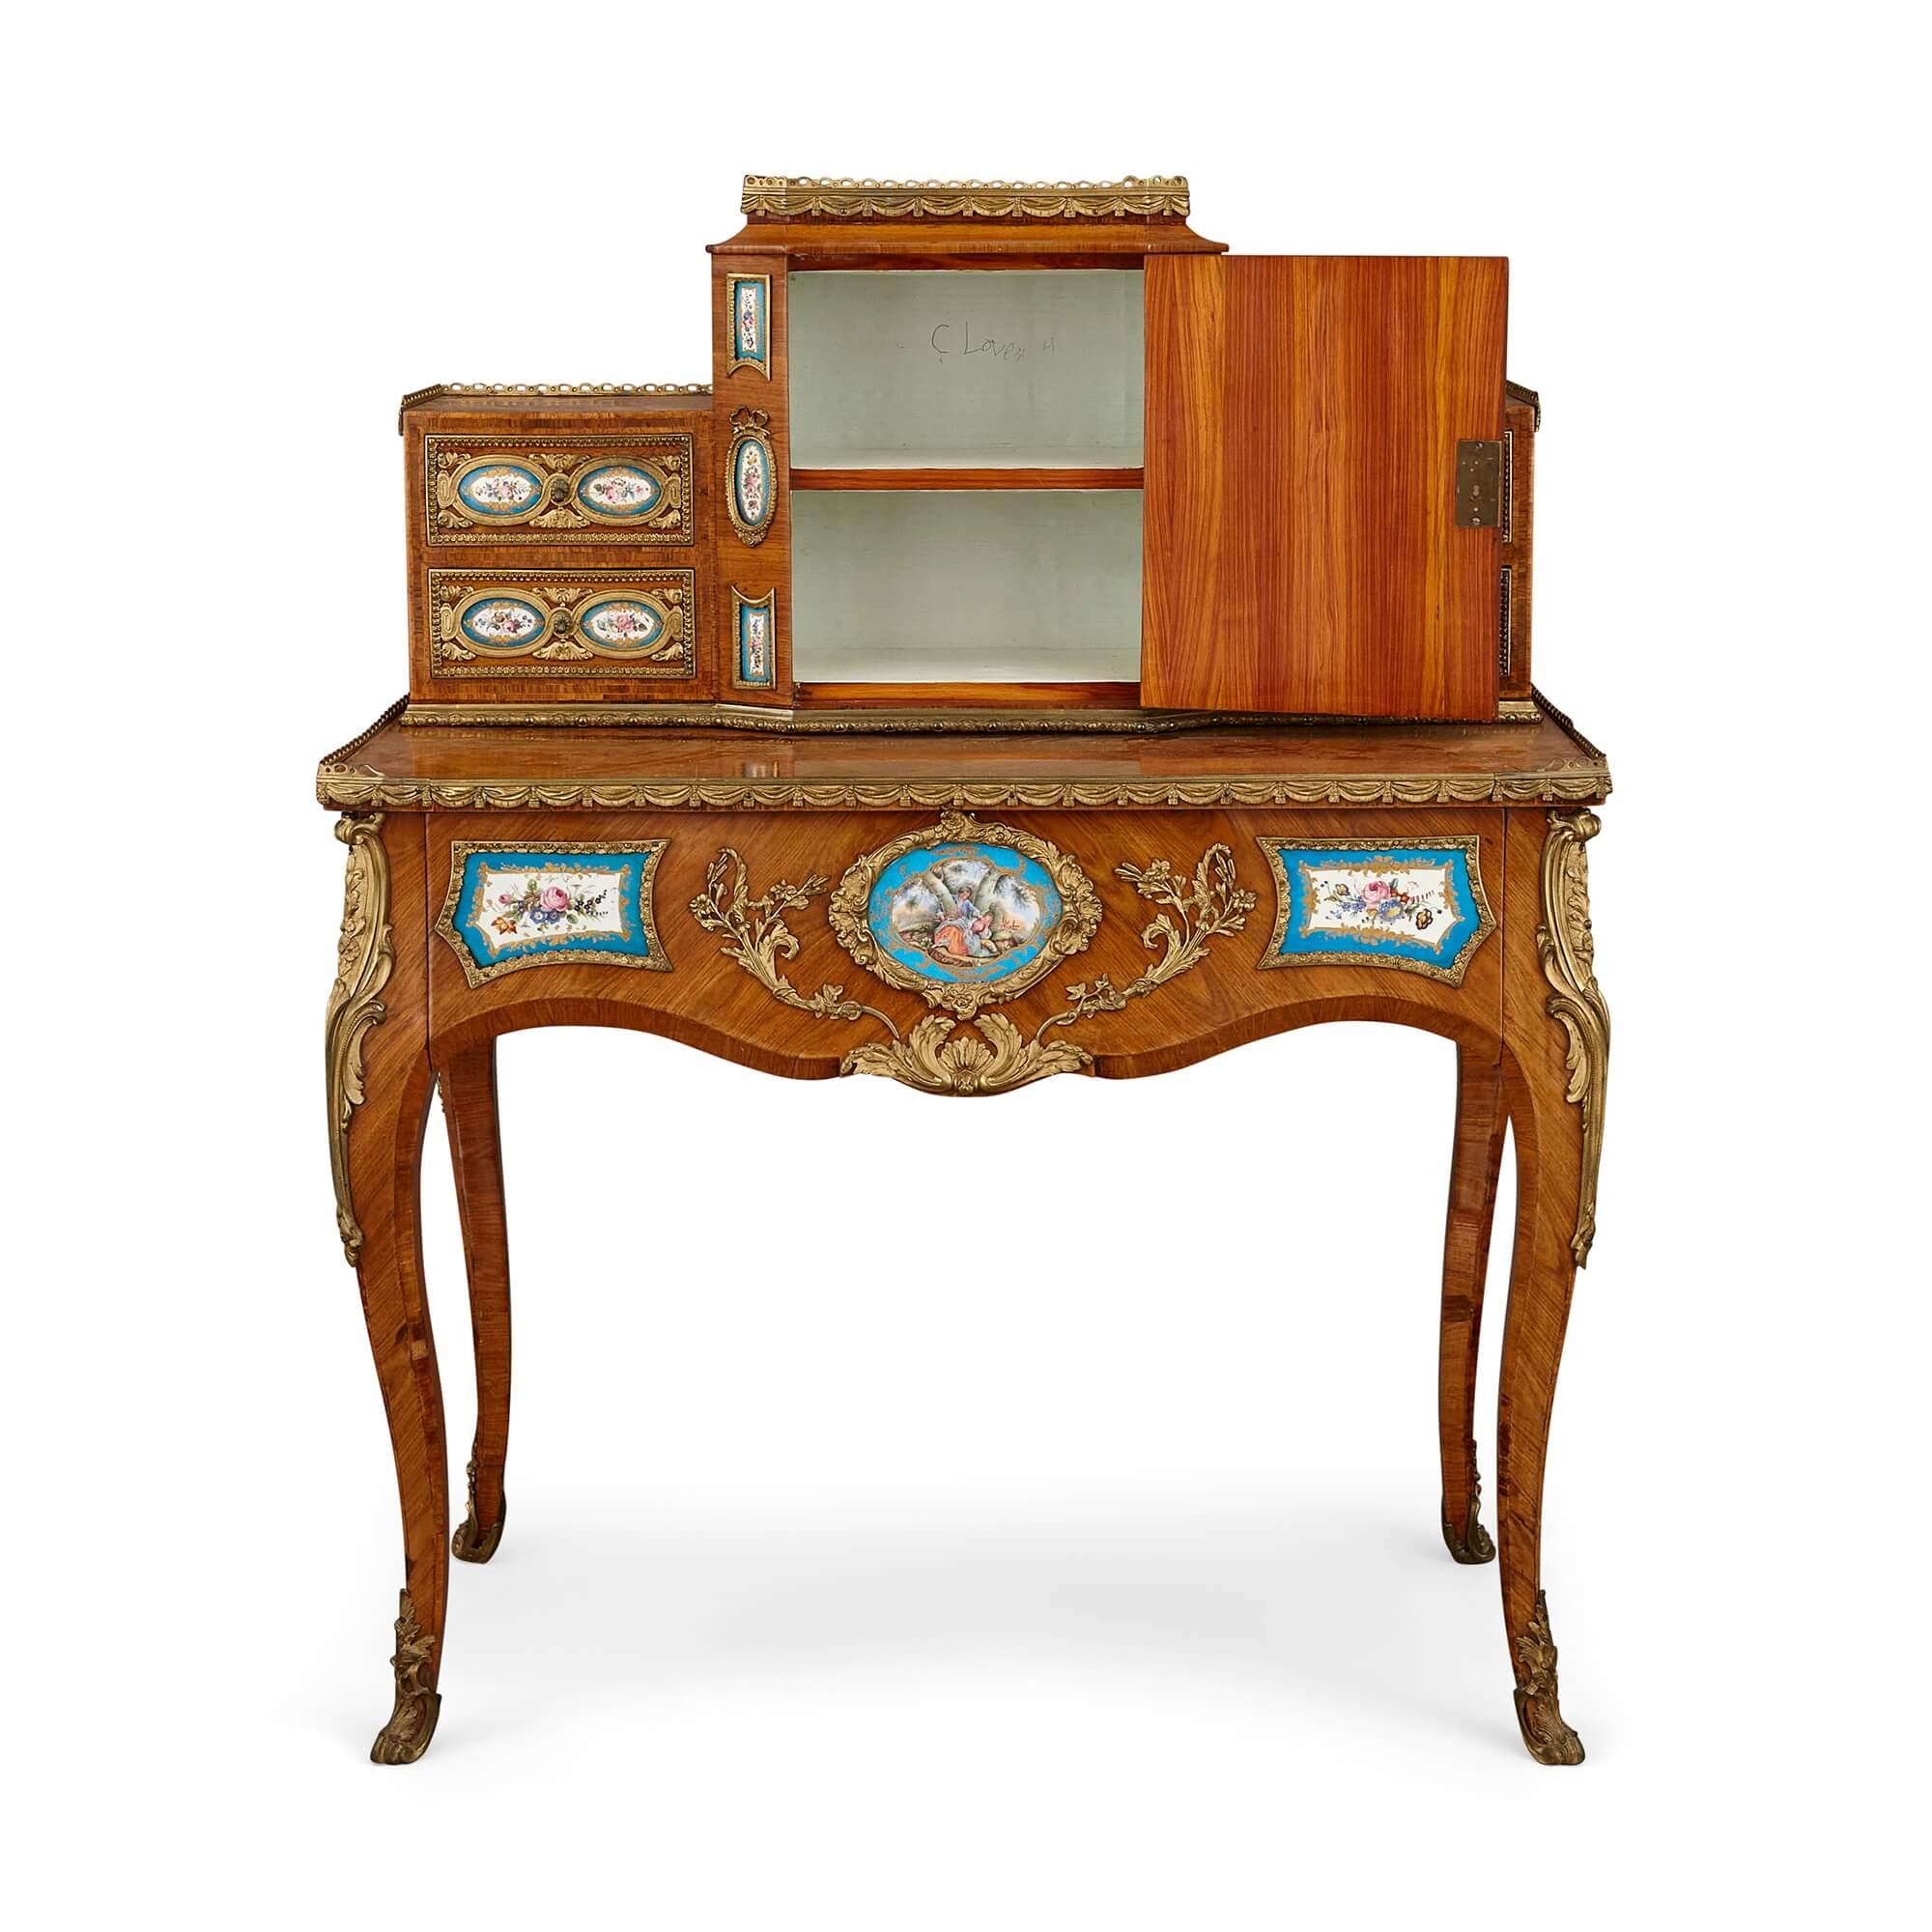 French porcelain and gilt bronze mounted writing desk
French, 19th Century 
Height 116cm, width 91cm, depth 51cm

This stunning bonheur du jour was made in France during the 19th century. A variation of a lady’s writing desk, this furniture type